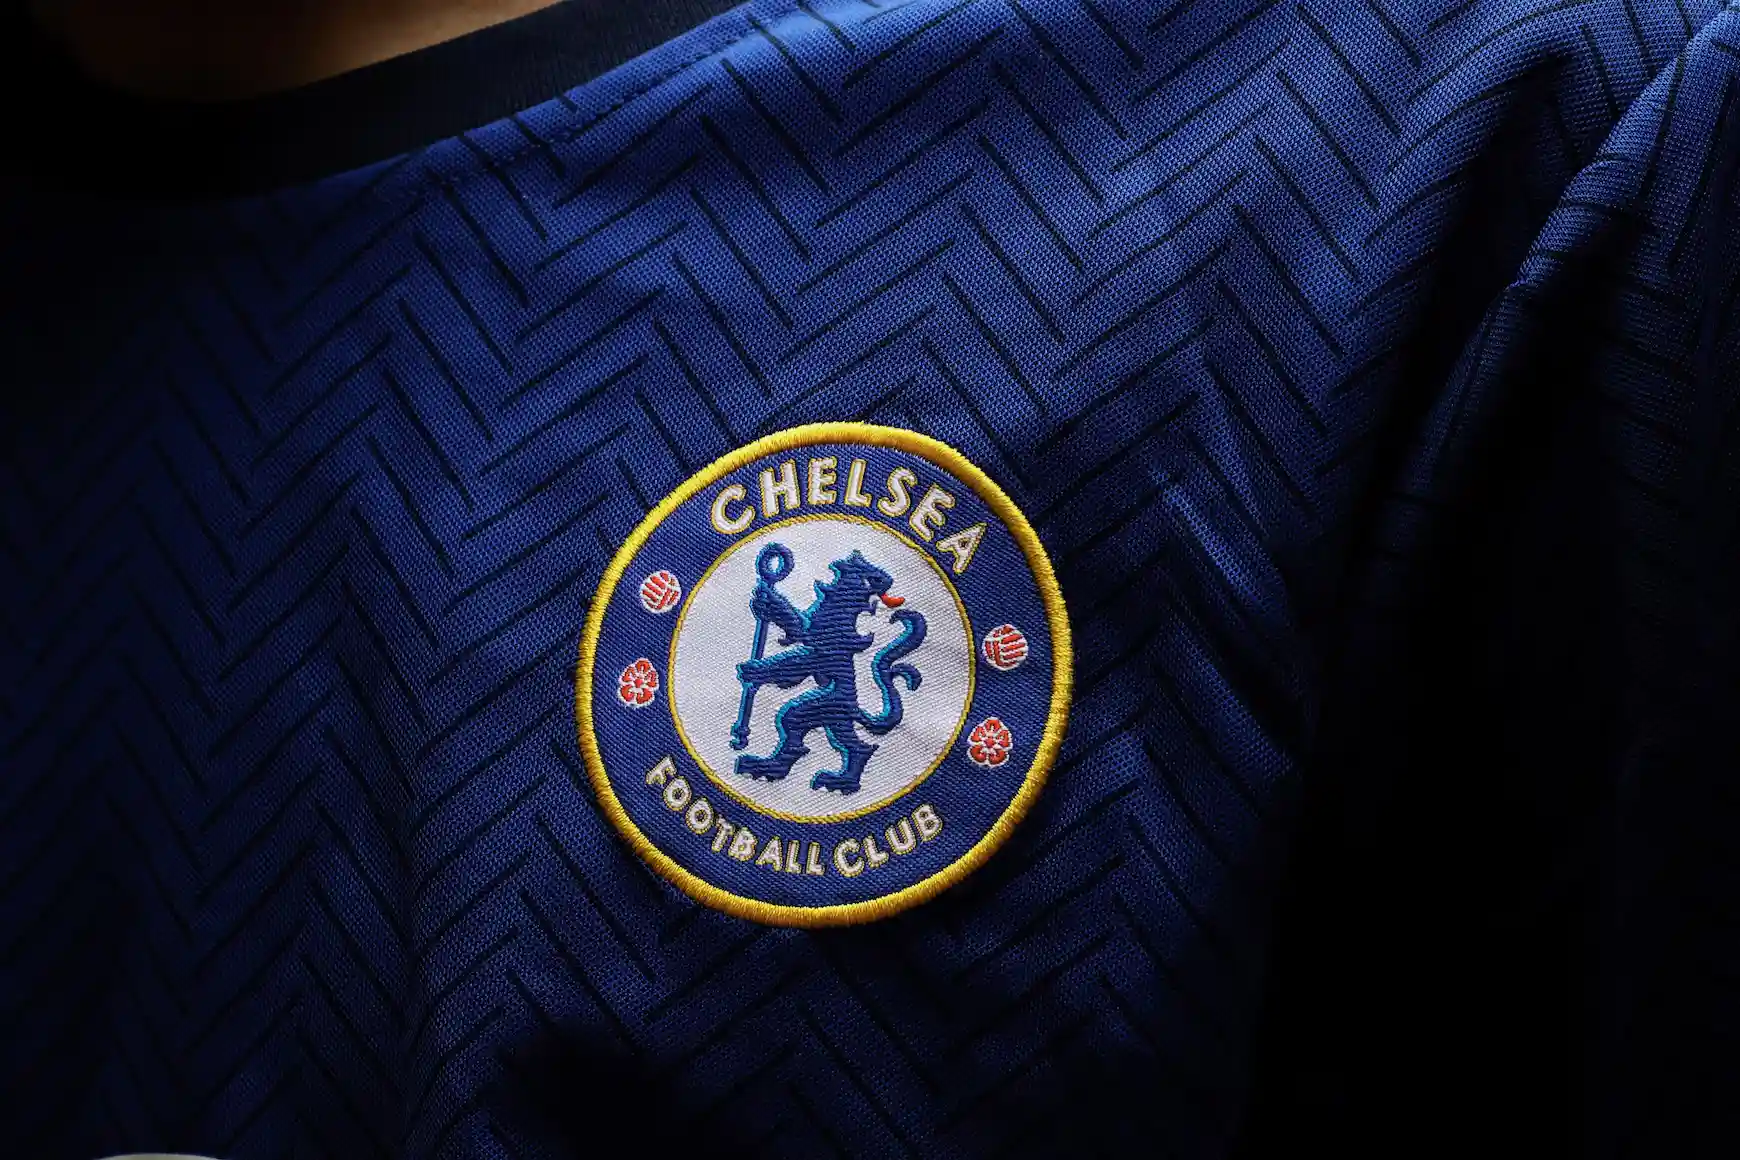 chelsea crest on a blue jersey